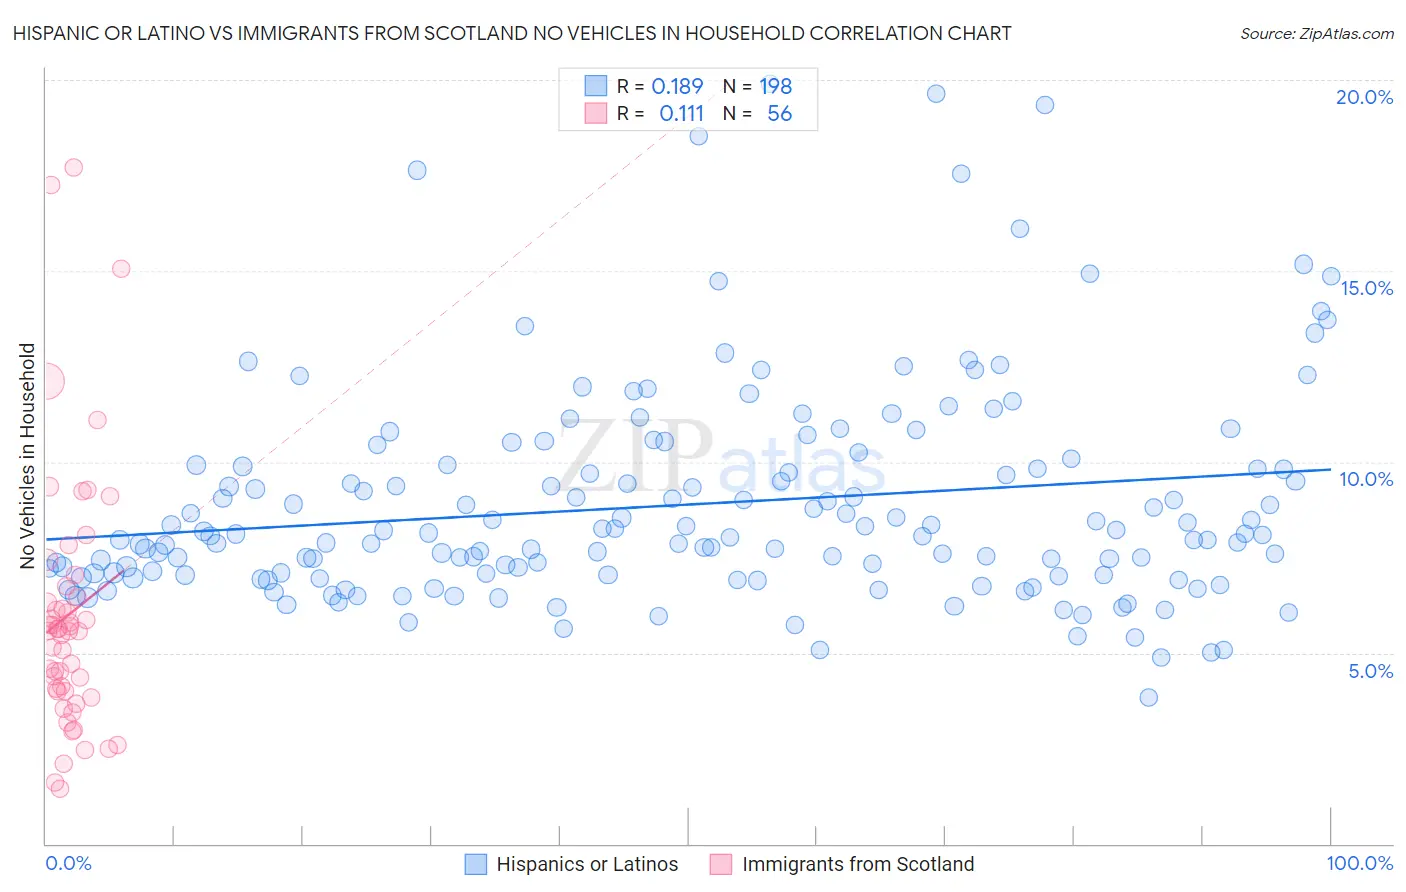 Hispanic or Latino vs Immigrants from Scotland No Vehicles in Household